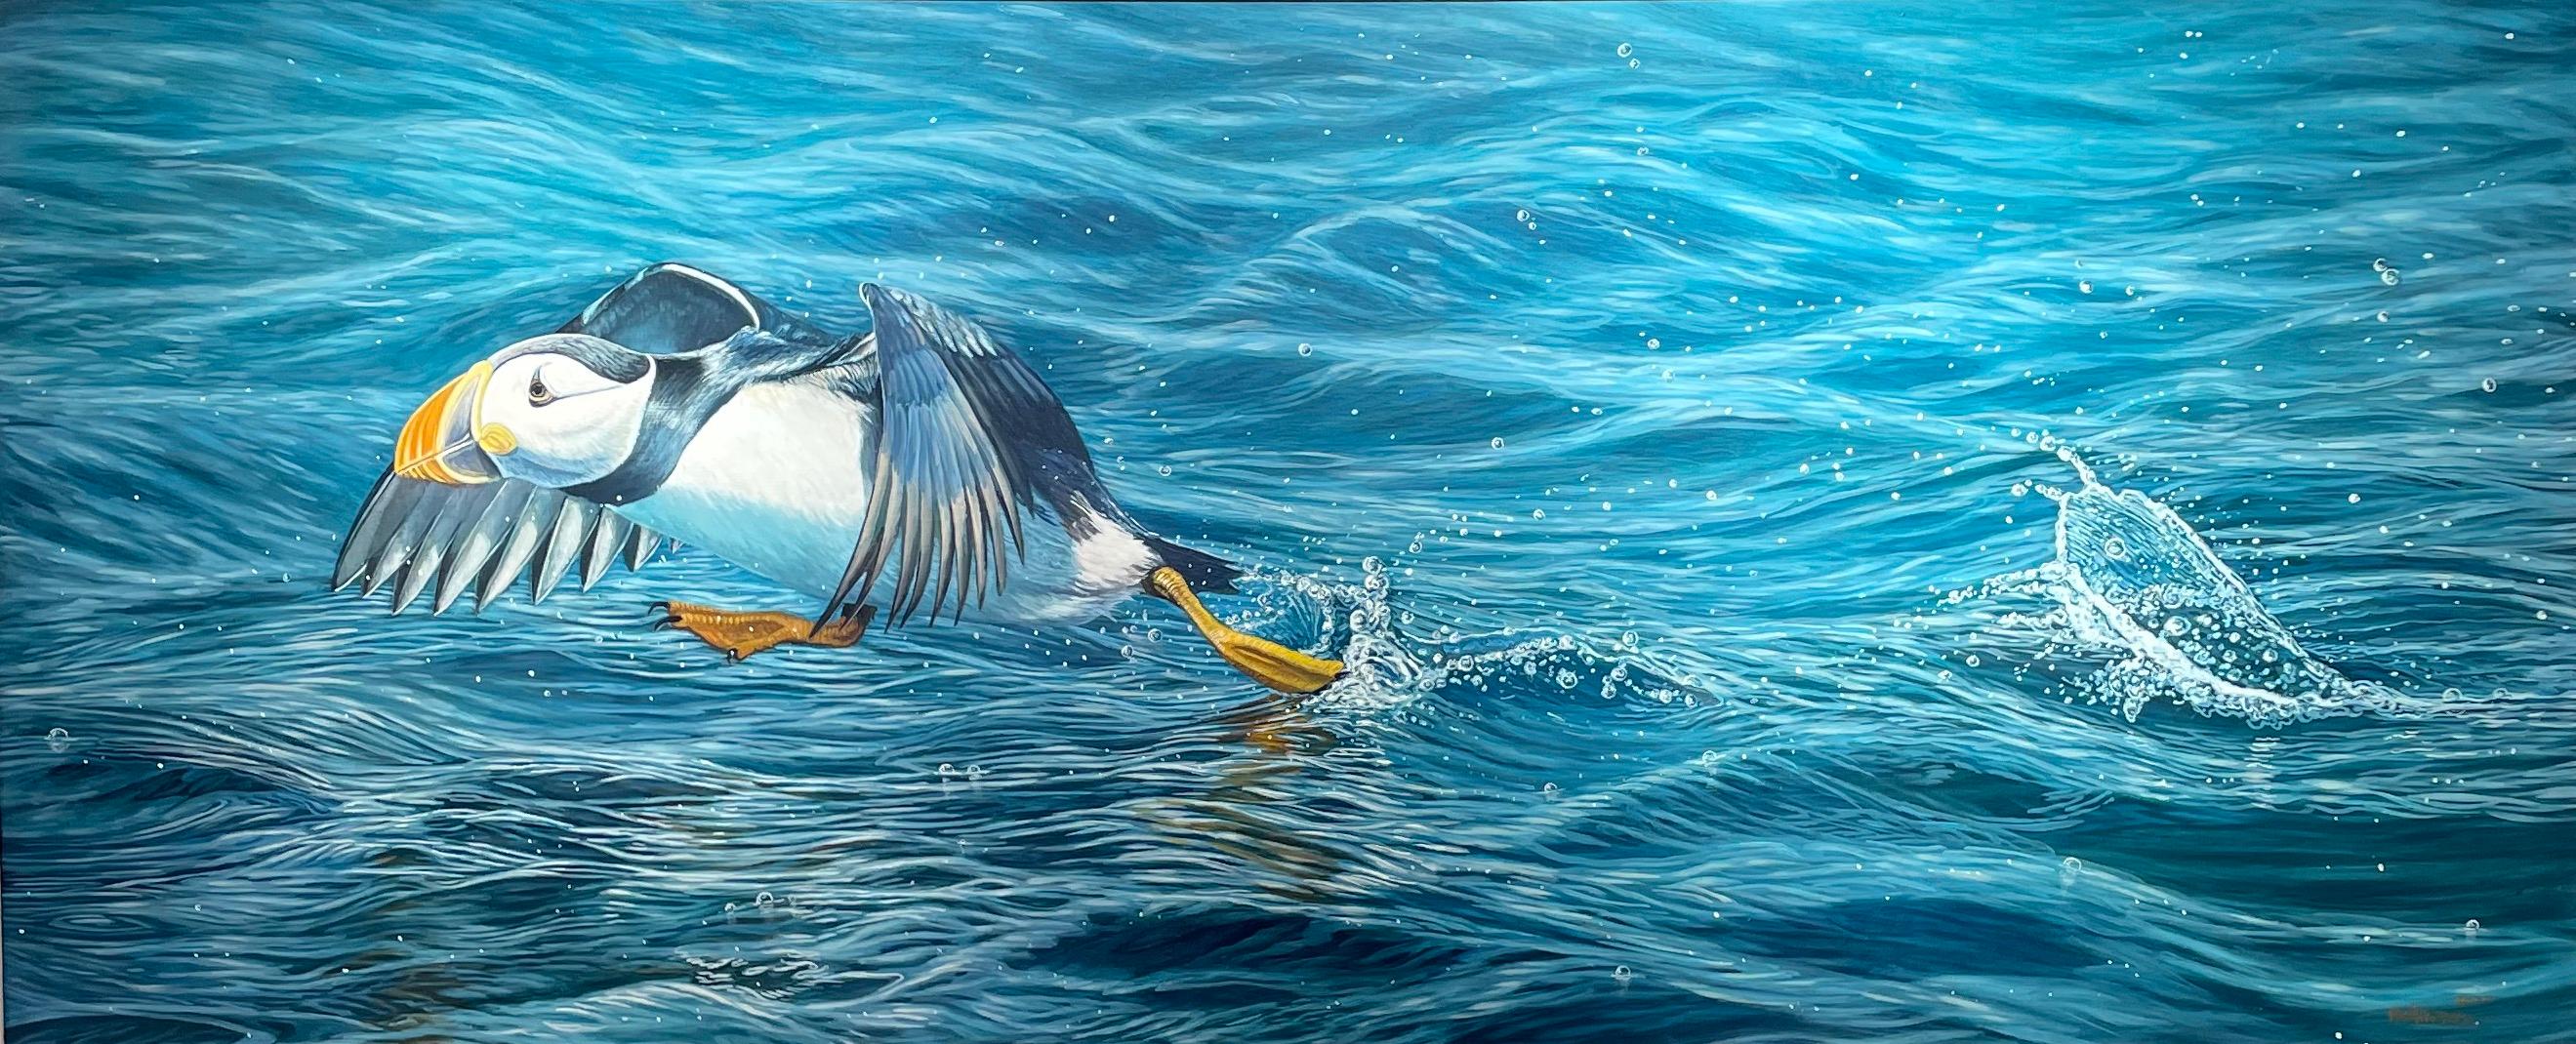 Ben Waddams Animal Painting - 'Leap of Faith' Photorealist wildlife painting of a Puffin on vibrant blue water